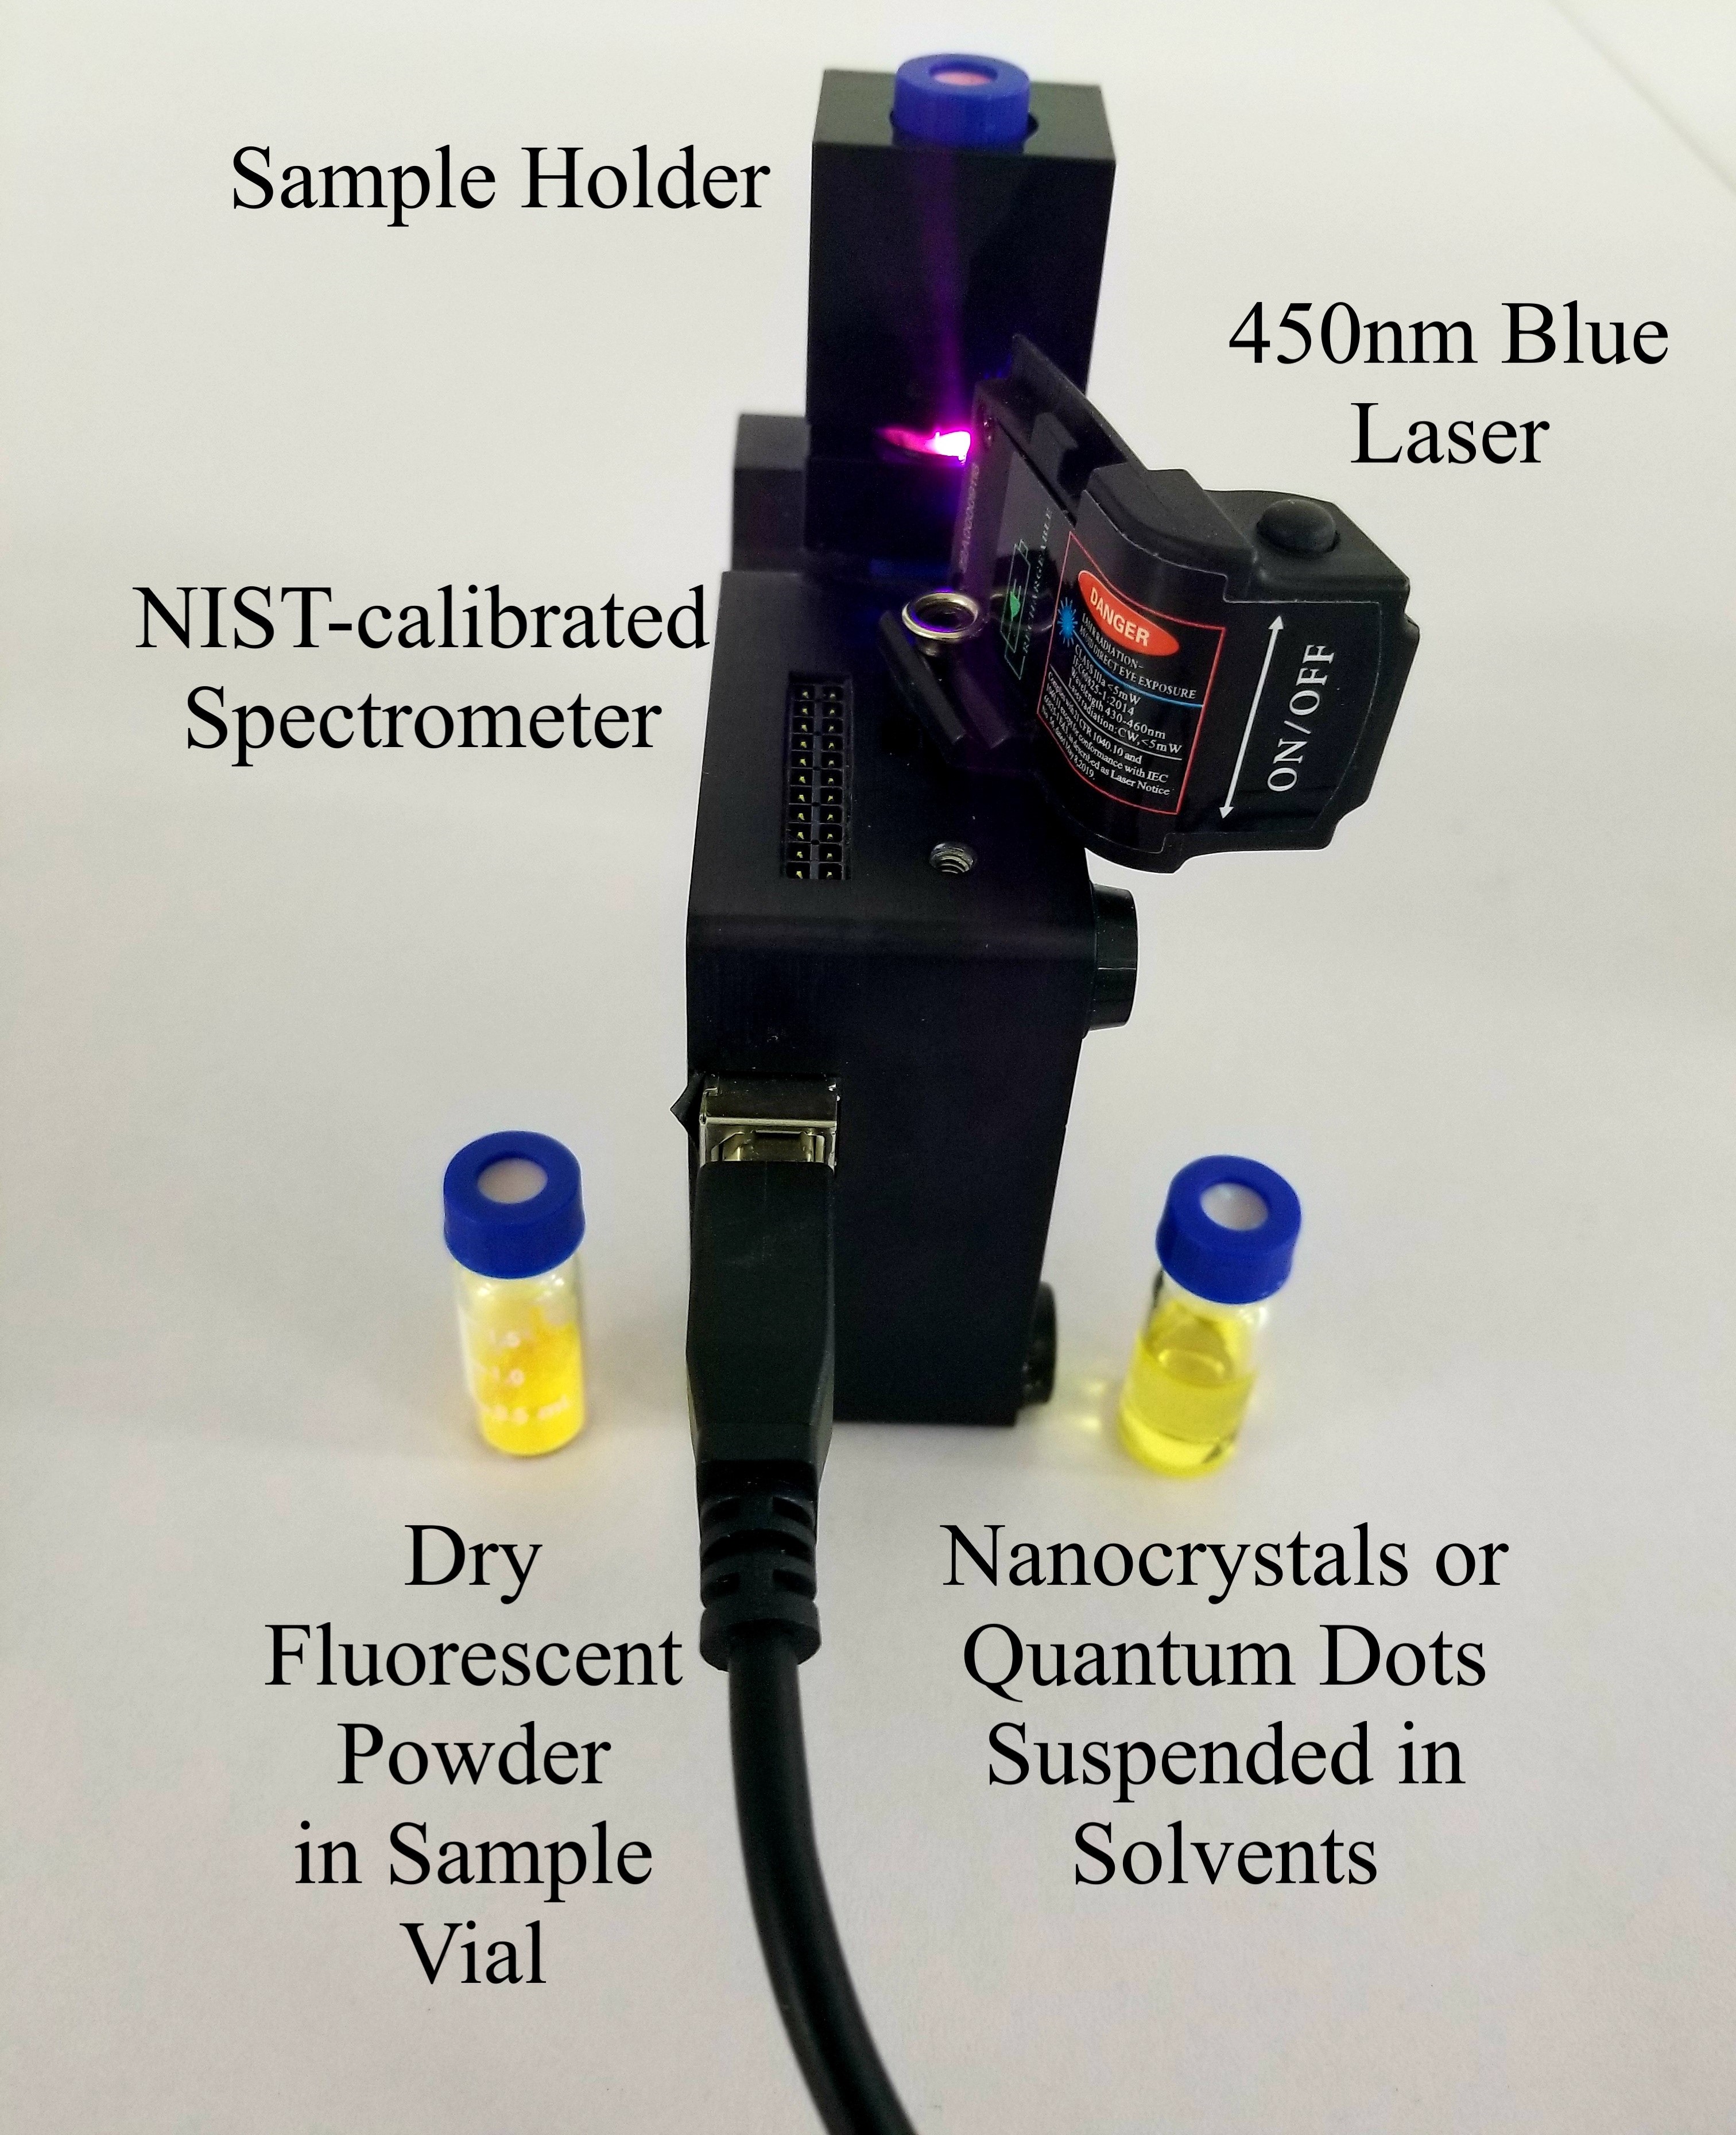 USB instrument for CIE and spectral measurement of fluorescent powders and solutions.